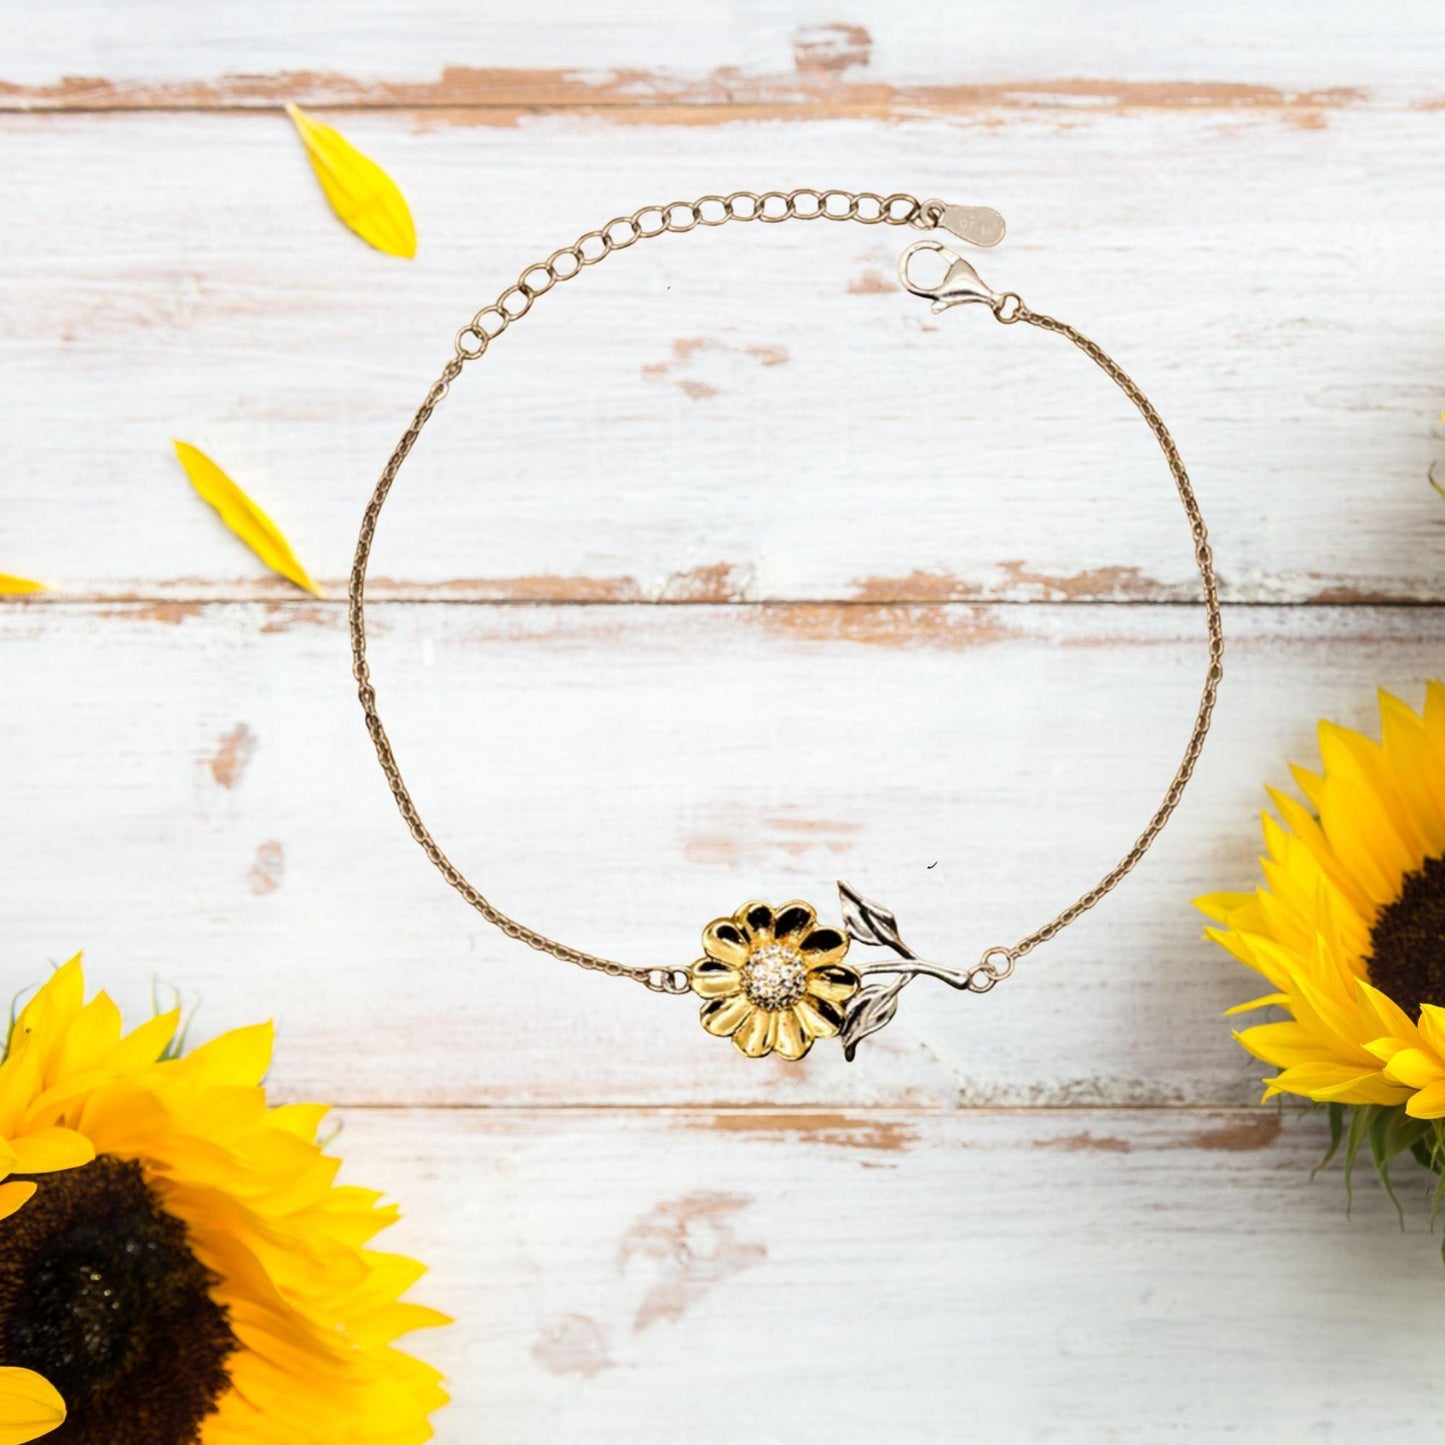 Sunflower Bracelet for Mom Present, Mom Always follow your dreams, never forget how amazing you are, Mom Birthday Christmas Gifts Jewelry for Girls Boys Teen Men Women - Mallard Moon Gift Shop